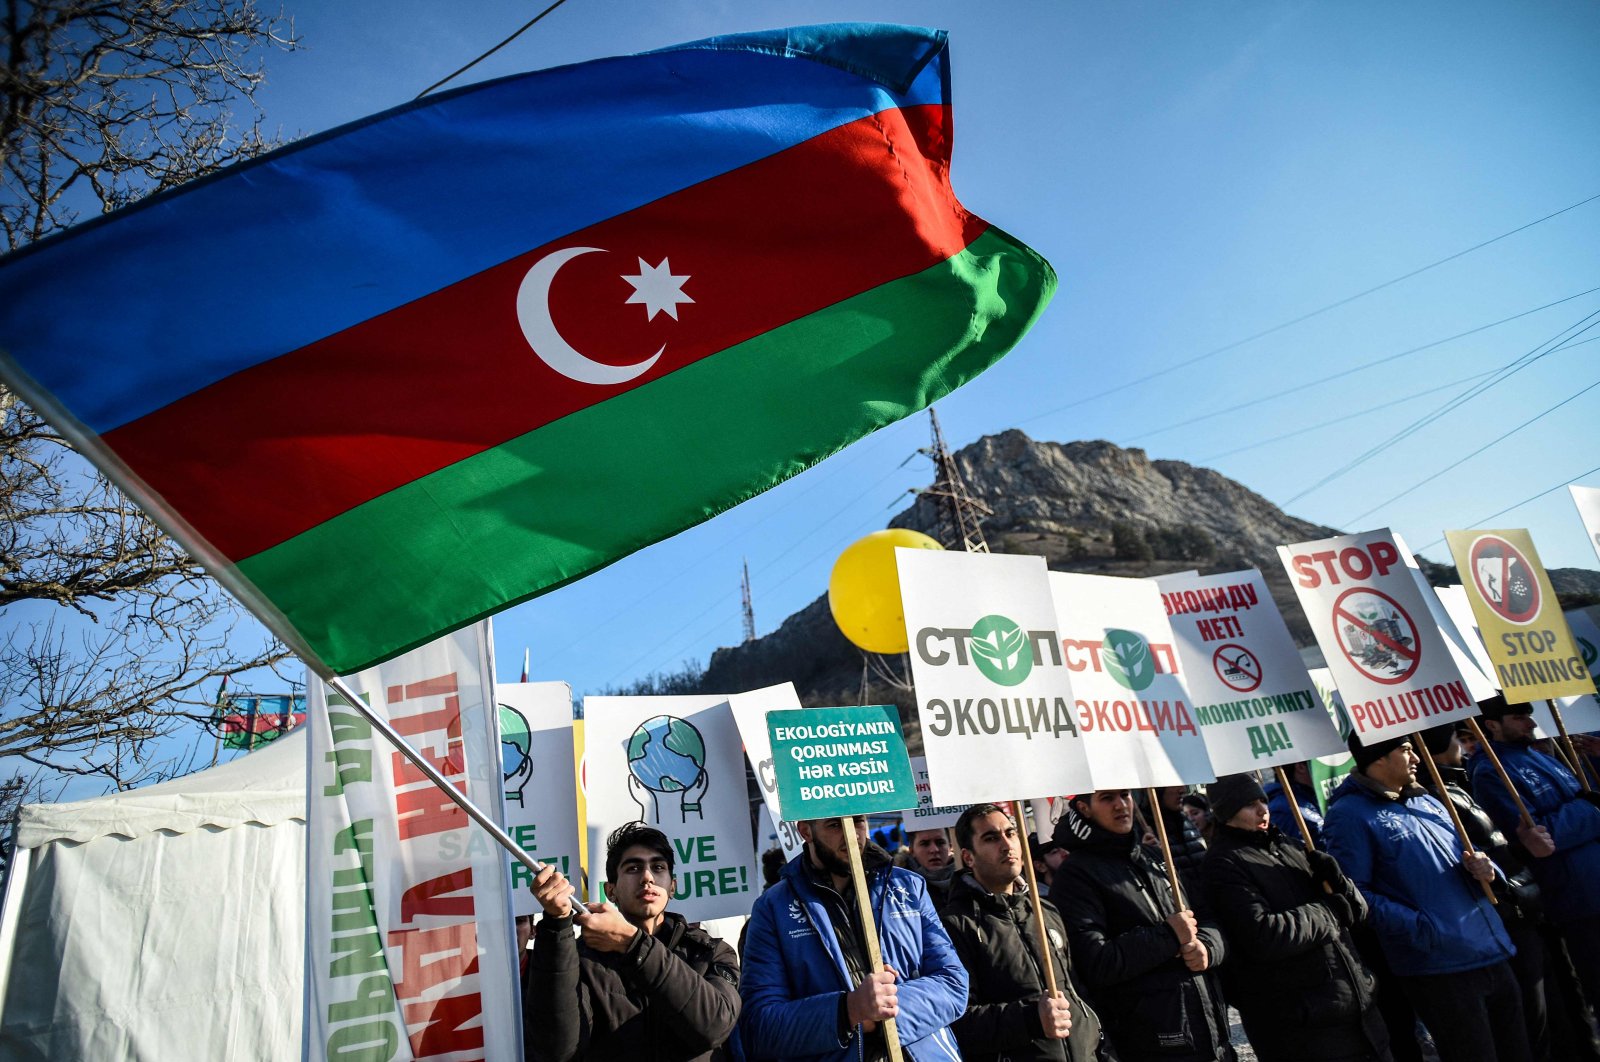 An Azerbaijani environmental activist waves a national flag during a protest against the illegal mining at the Lachin corridor, the Armenian-populated Karabakh region&#039;s only land link with Armenia, Azerbaijan, Dec. 27, 2022. (AFP Photo)